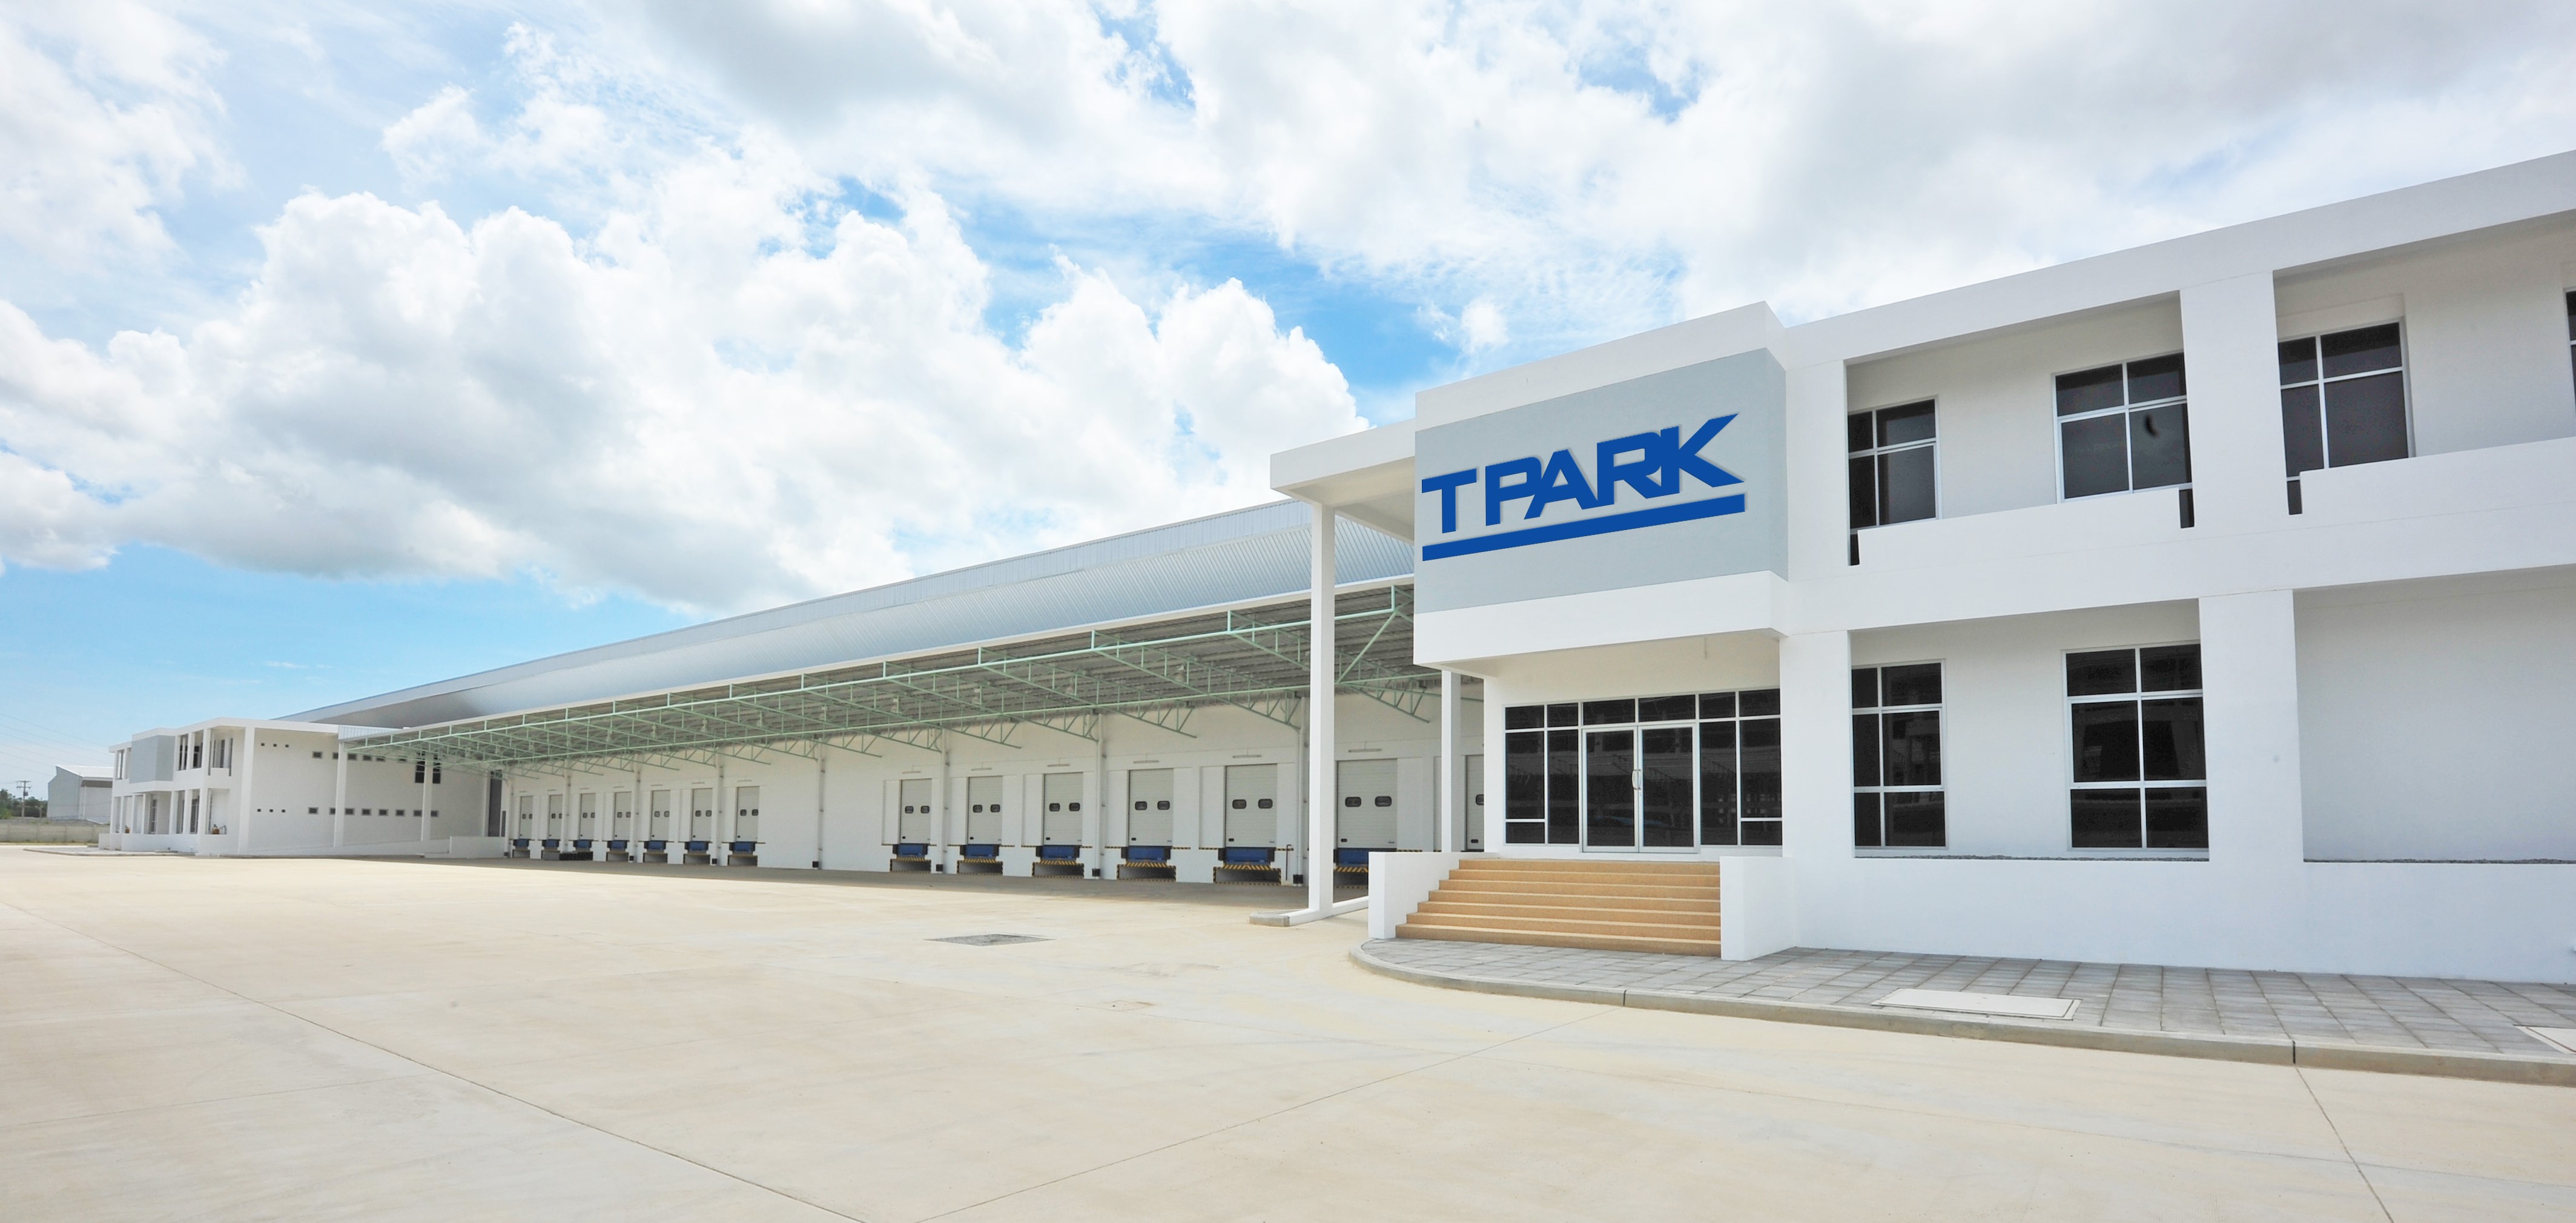 The TPARK Bangplee 4 warehouse by TICON, located in Bangkok, Thailand has achieved a preliminary EDGE certificate.